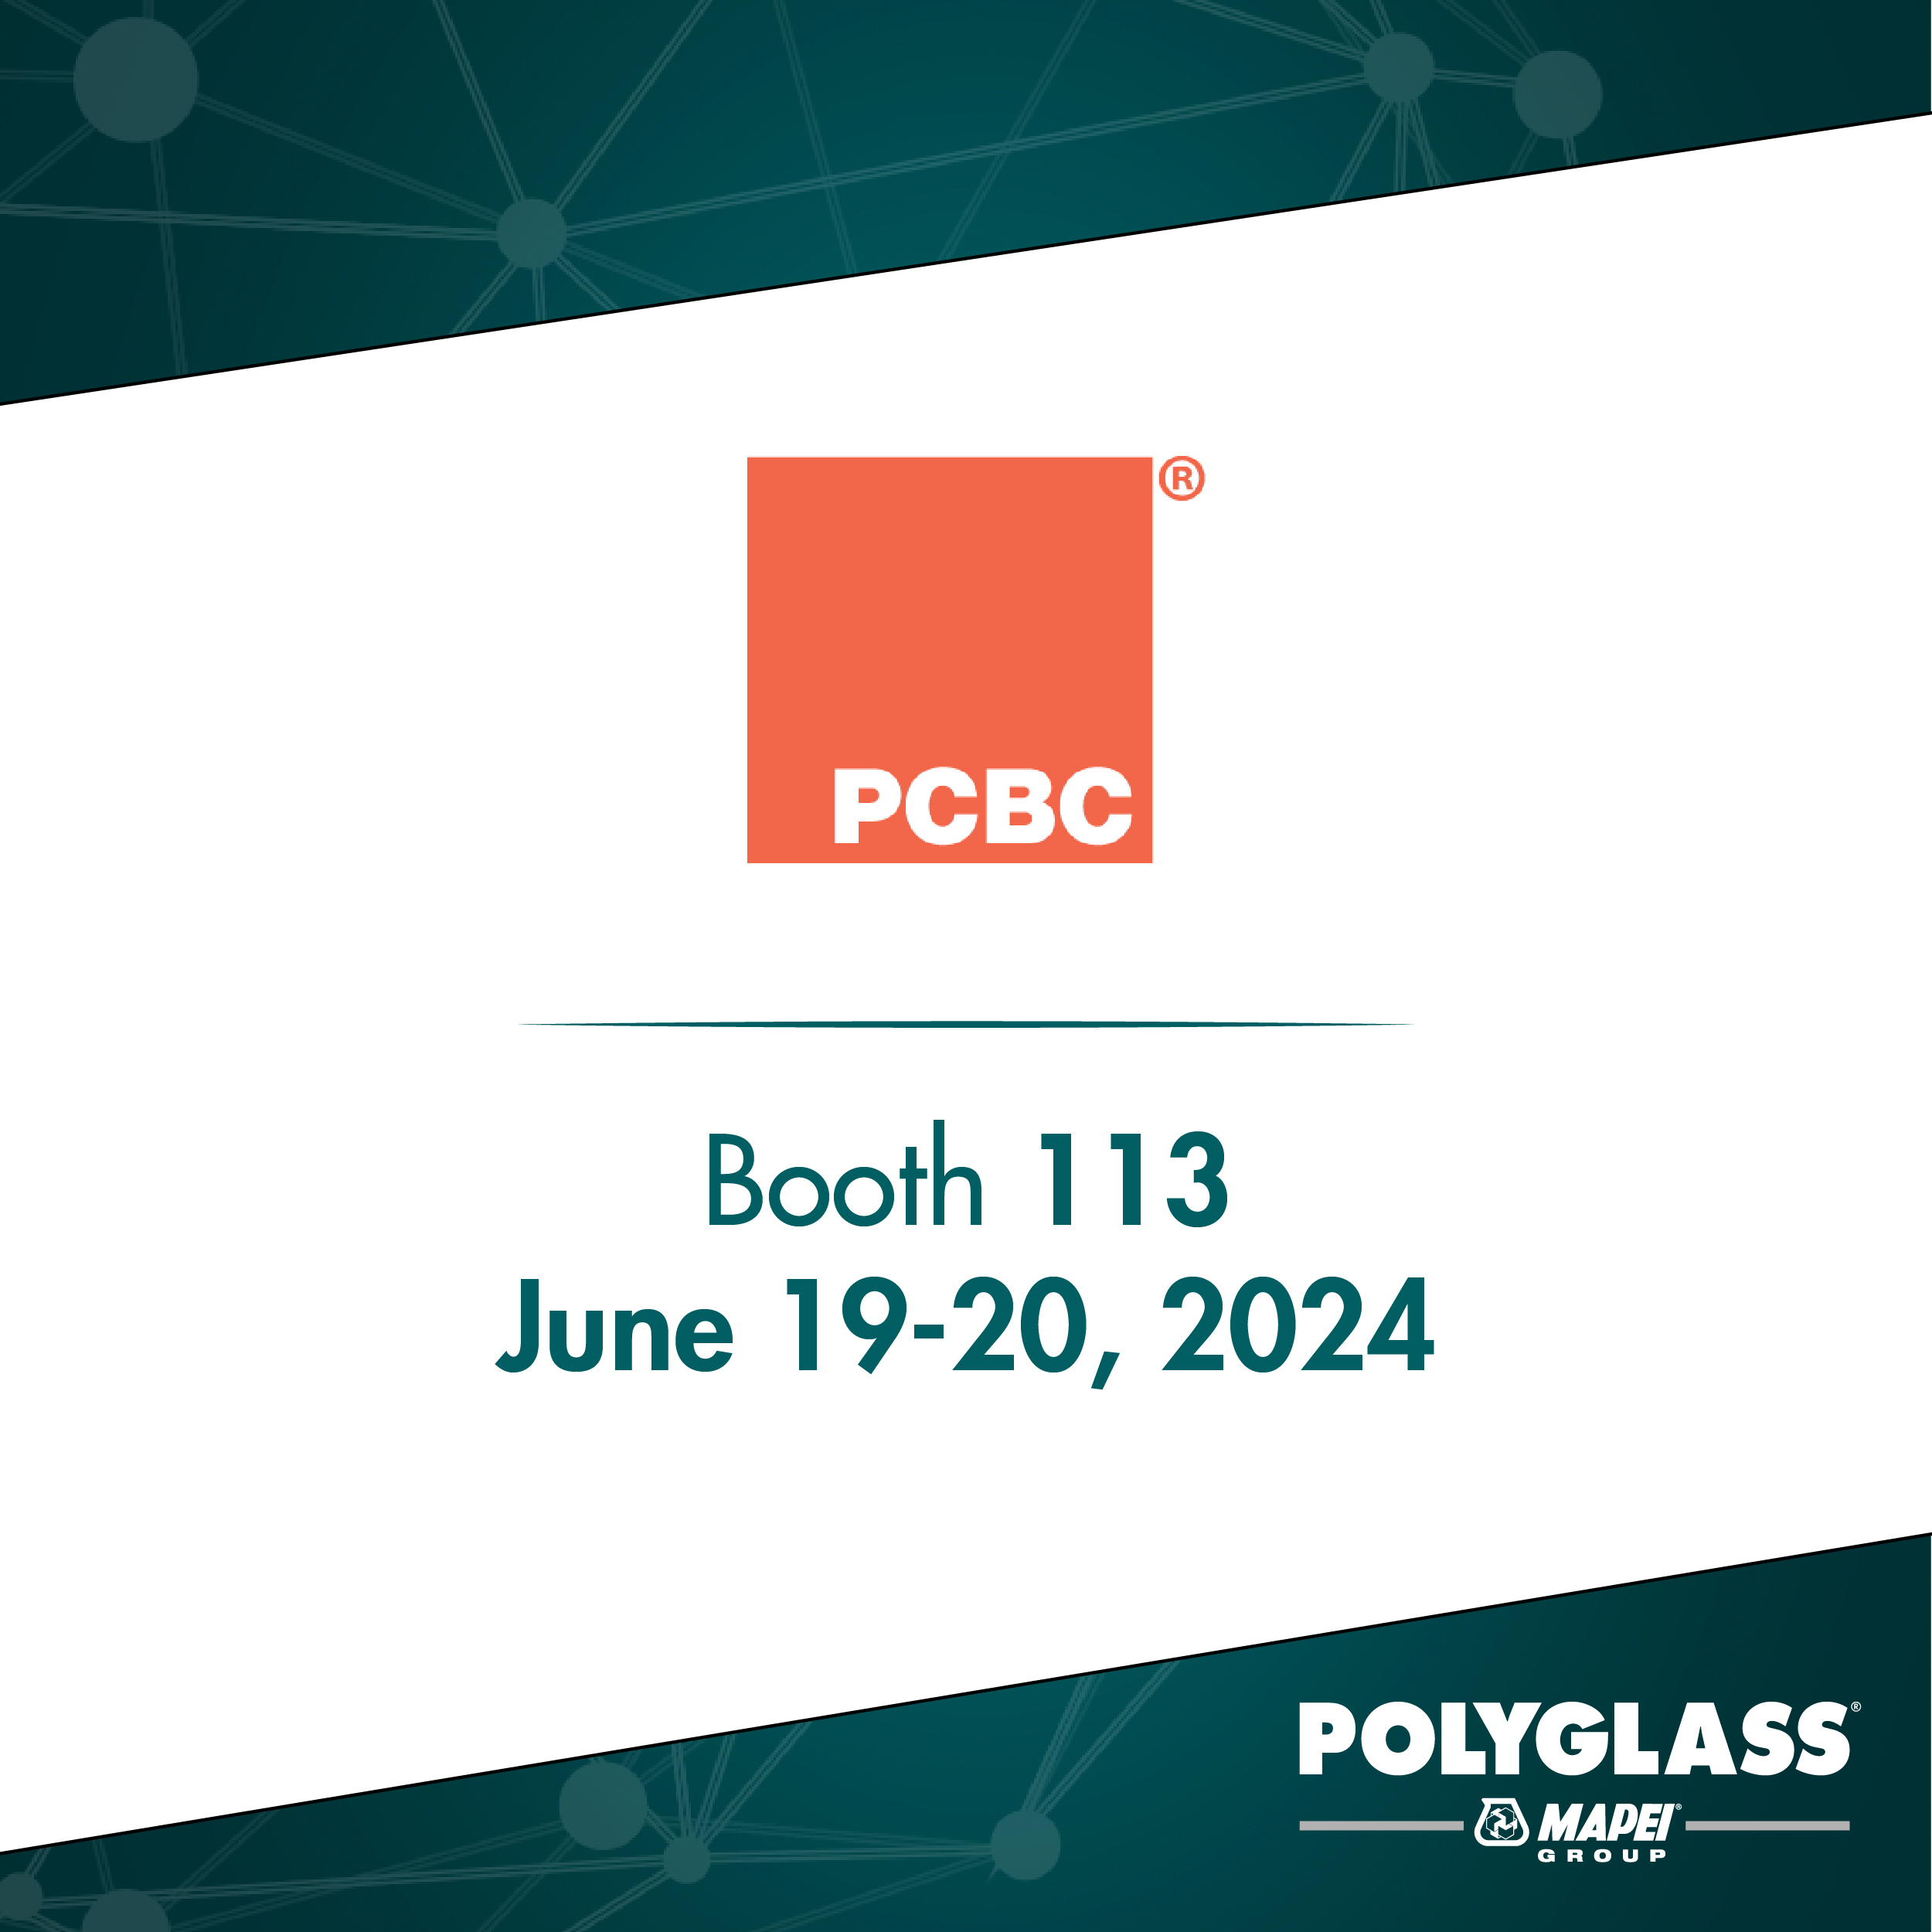 Polyglass to Debut at the Pacific Coast Builders Conference - Polyglass ...